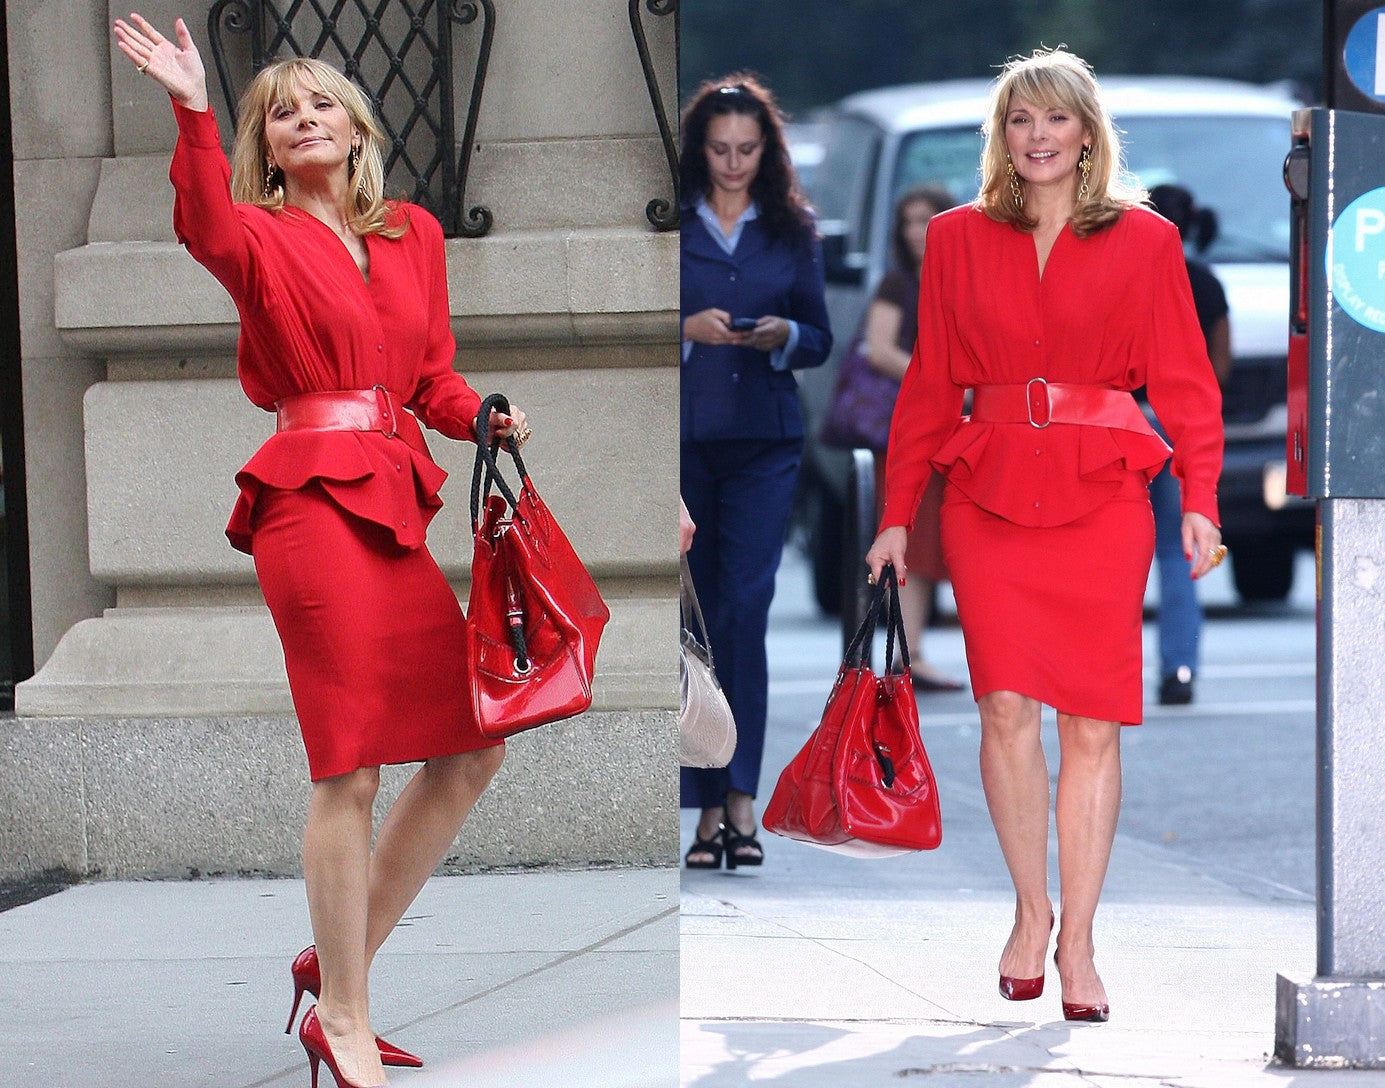 Samantha Jones wearing a Salsa Red coat and skirt, with a belt, being photographed walking in NY.